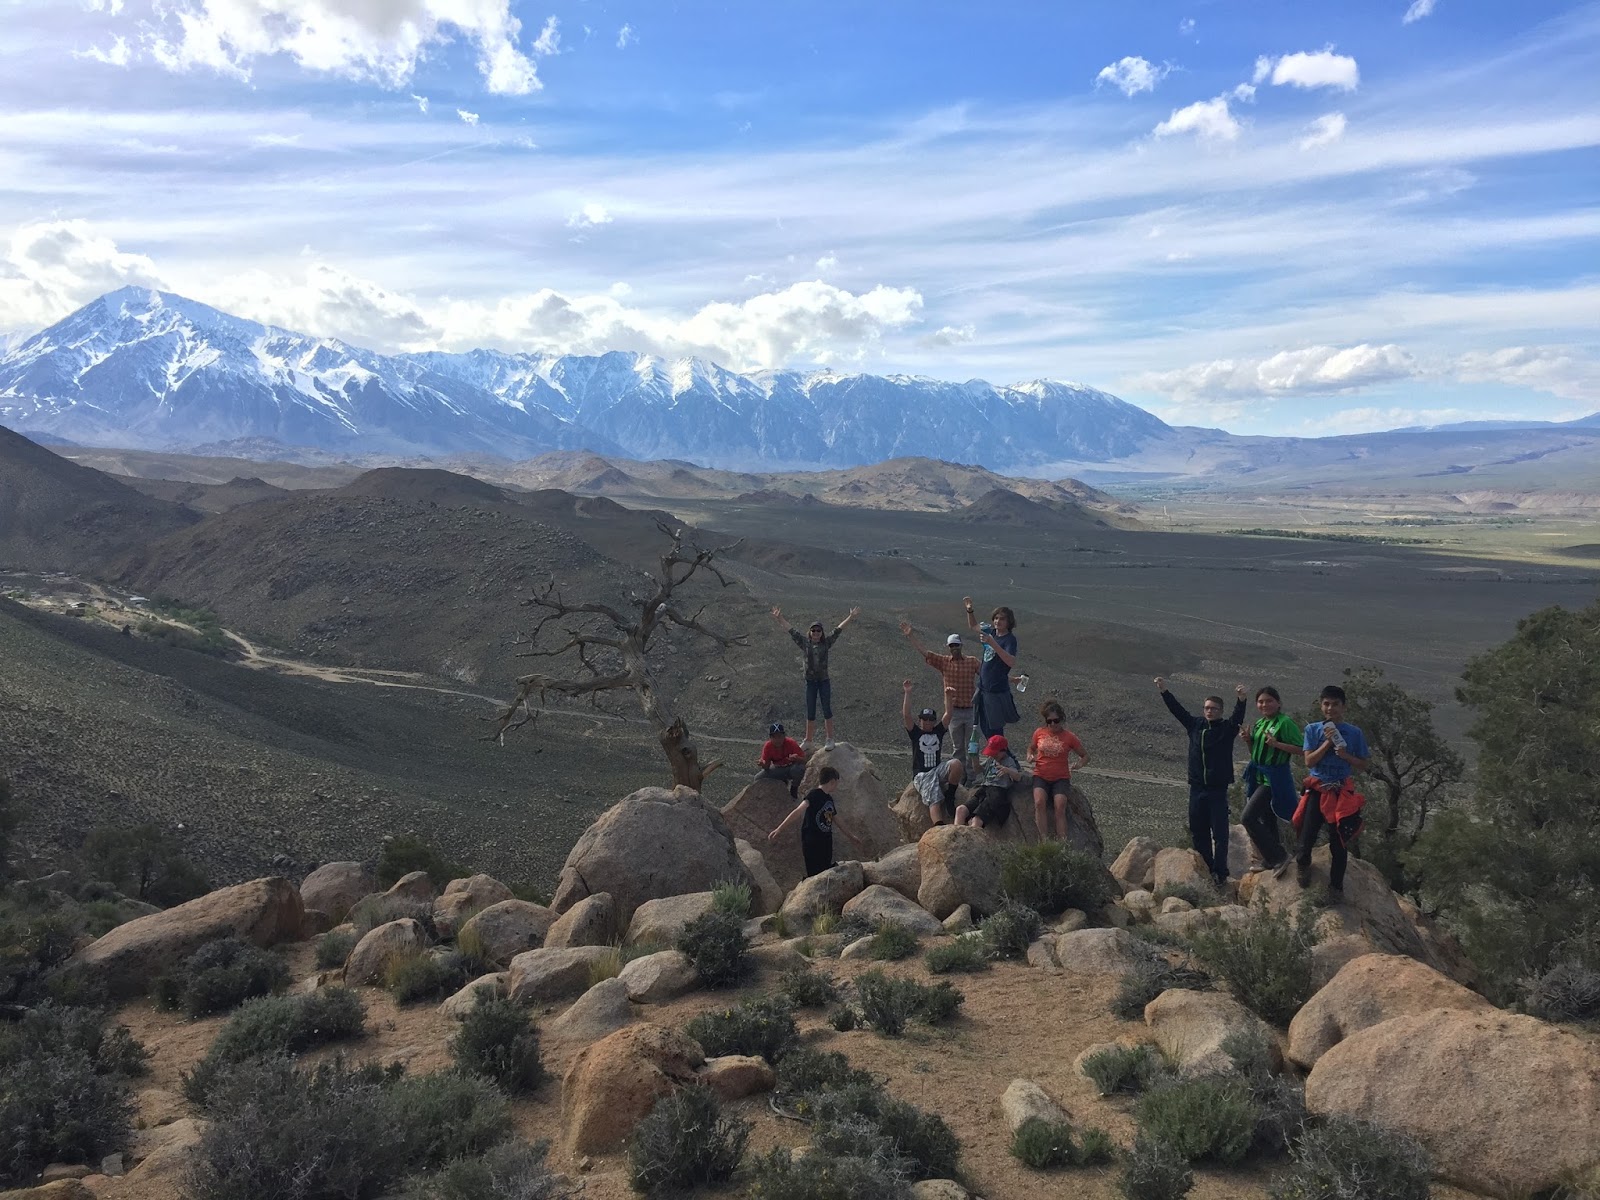 A photo of the hiking team in one of their activities.